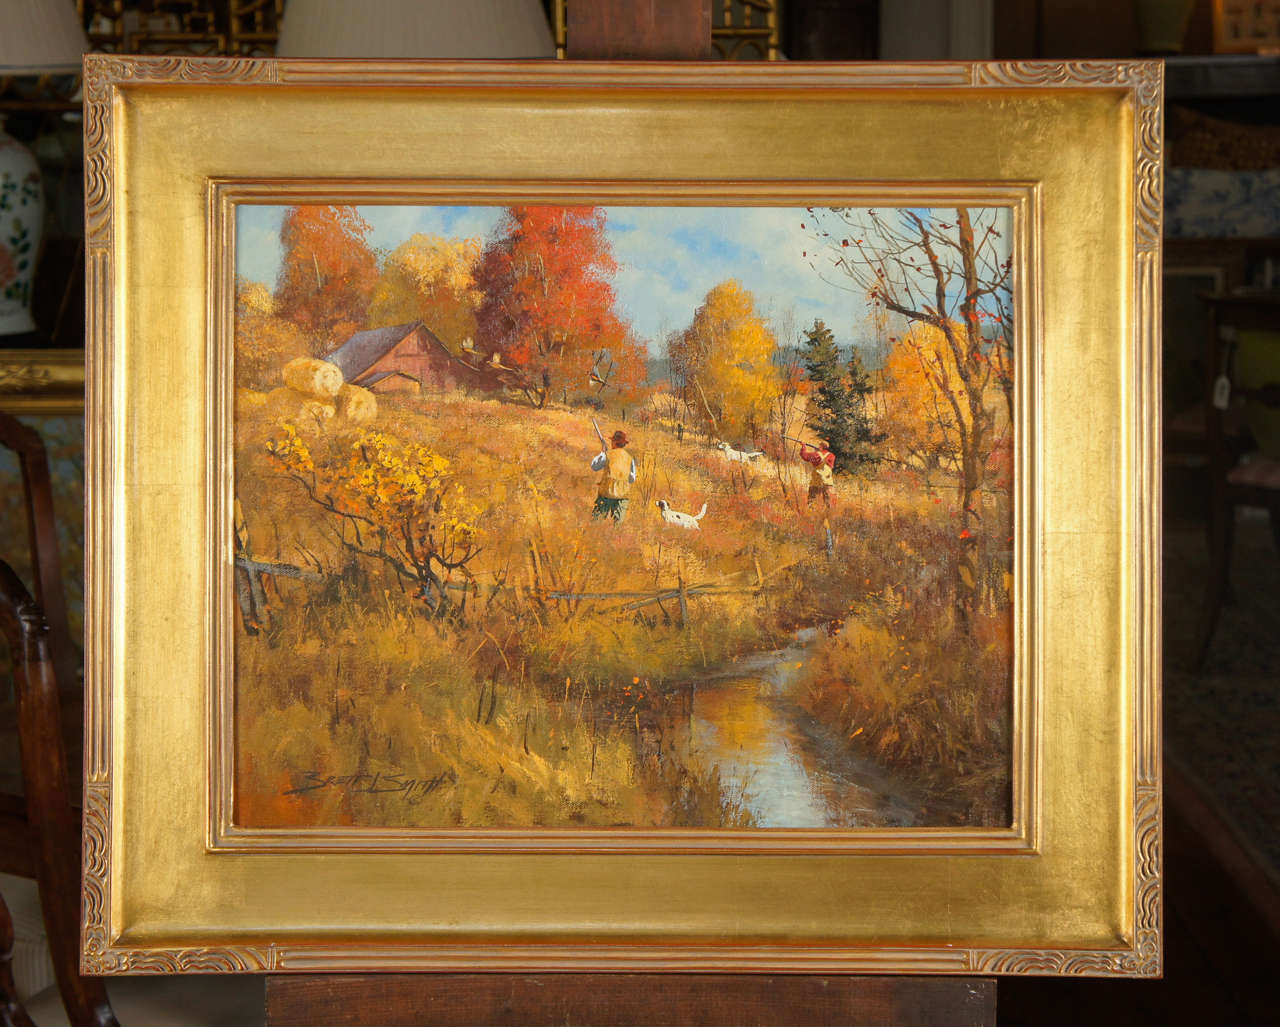 American oil on canvas by Brett J. Smith. Signed lower left. Gilded frame. Smith was born in Louisiana in 1958. He works in Louisiana and Montana. Specializes in sporting art.